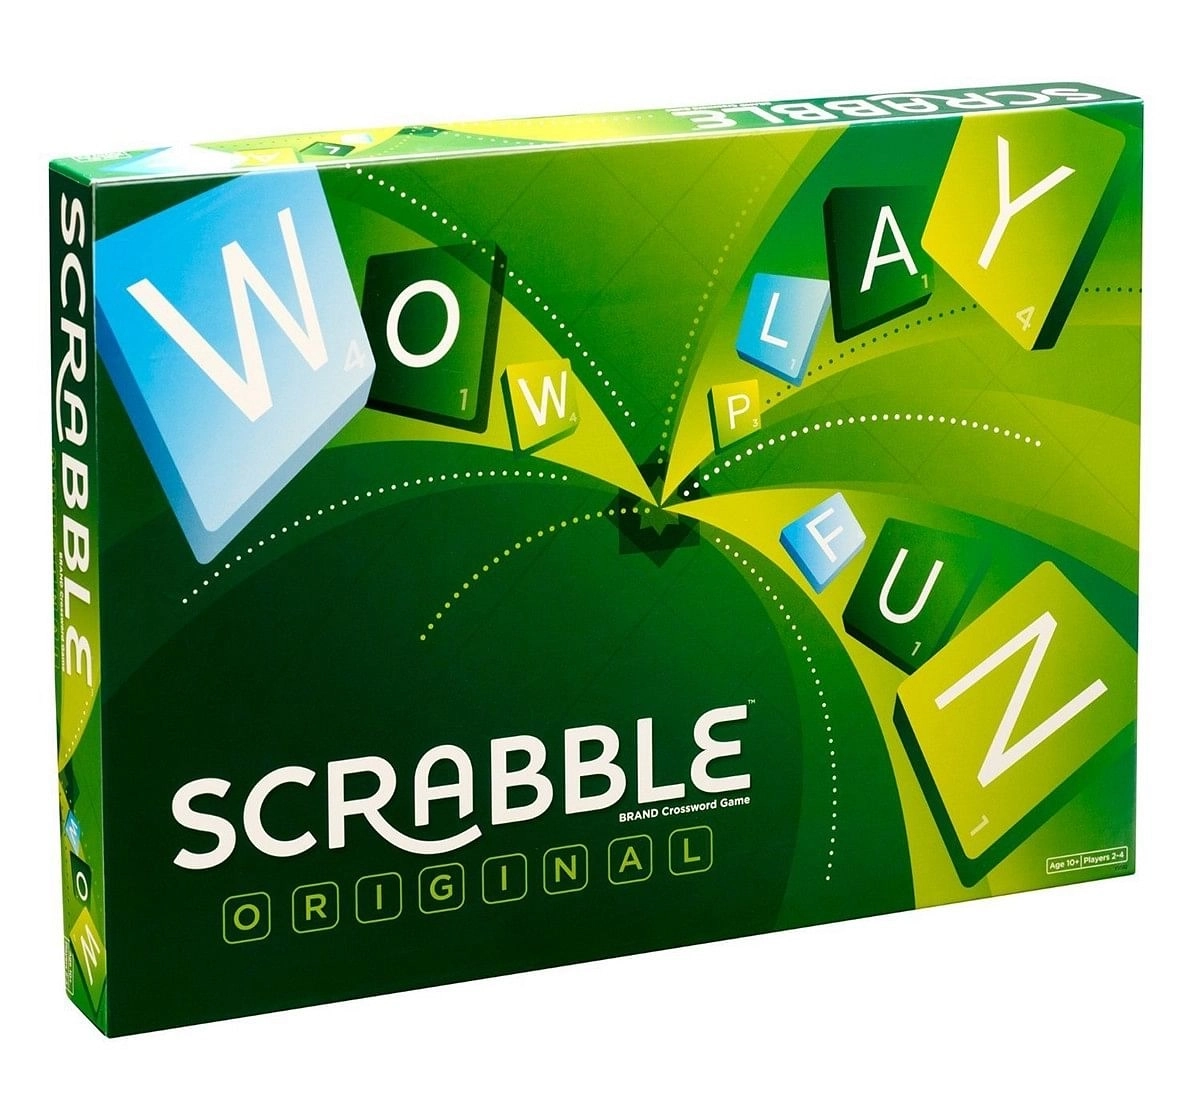 Mattel Scrabble Board Game, Strategic Gameplay, World's Most Popular Word Game, Age 10Y+